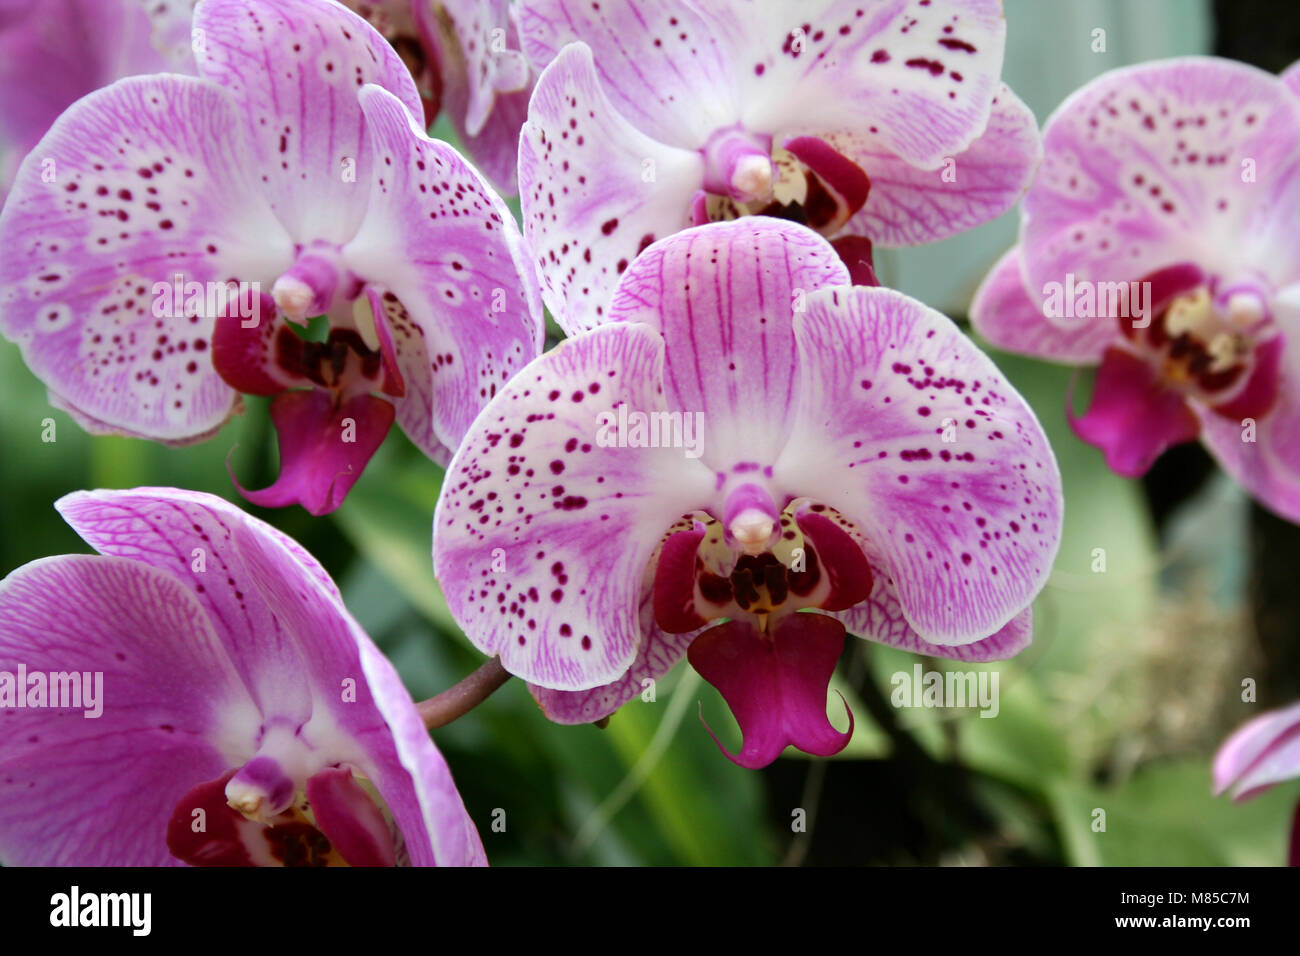 Colorful orchids close up image Stock Photo